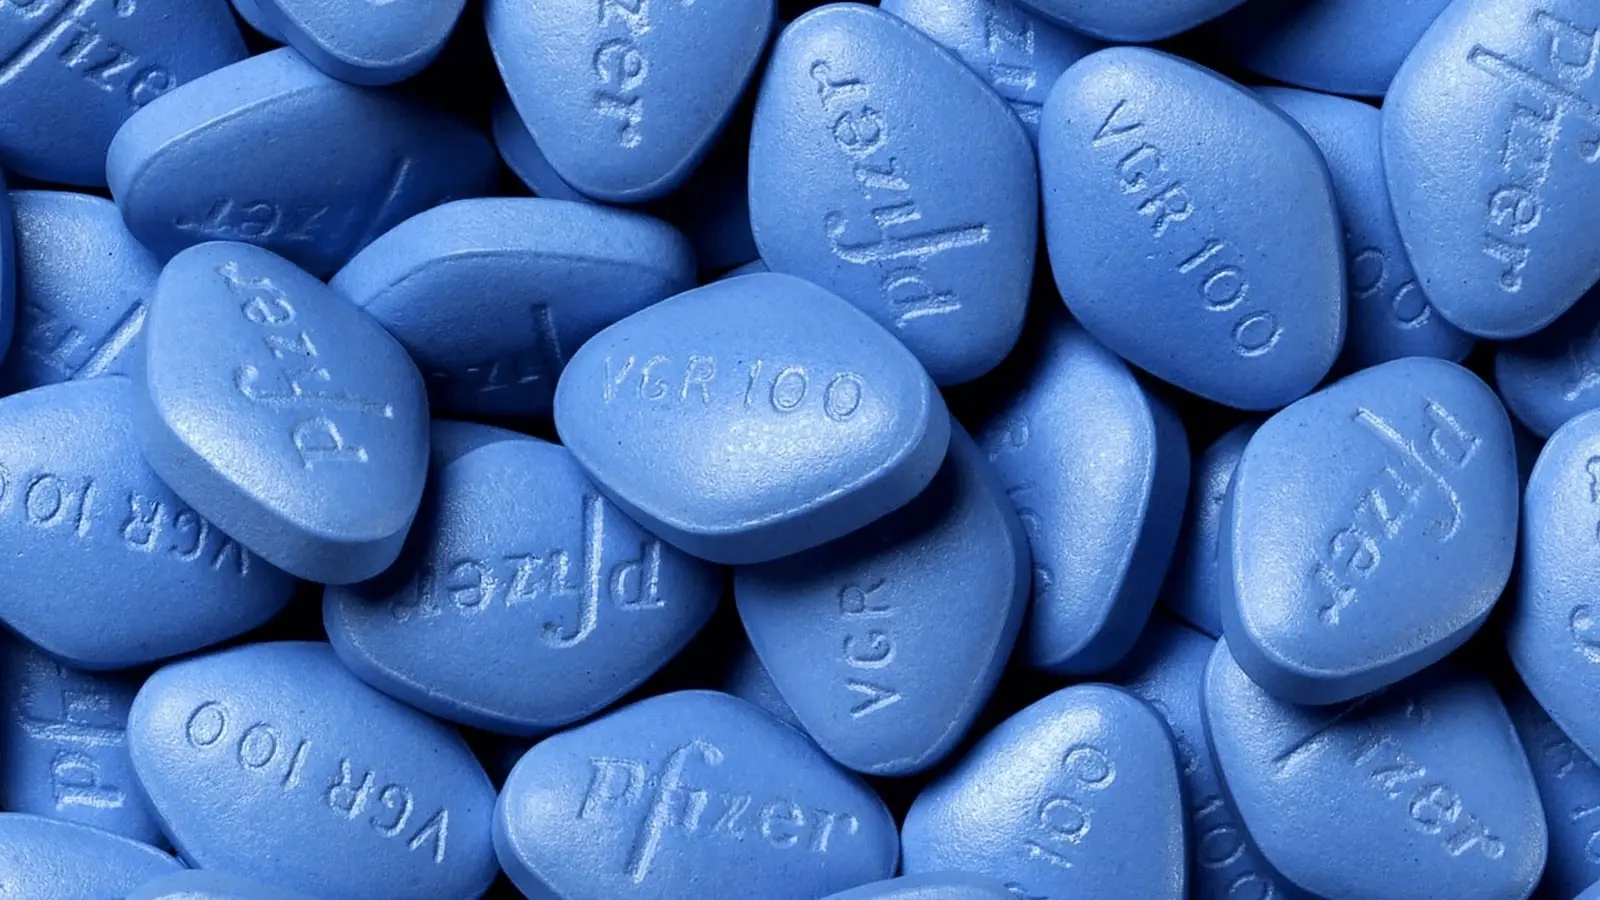 Viagra: The Most Well-Known Erectile Dysfunction Pills